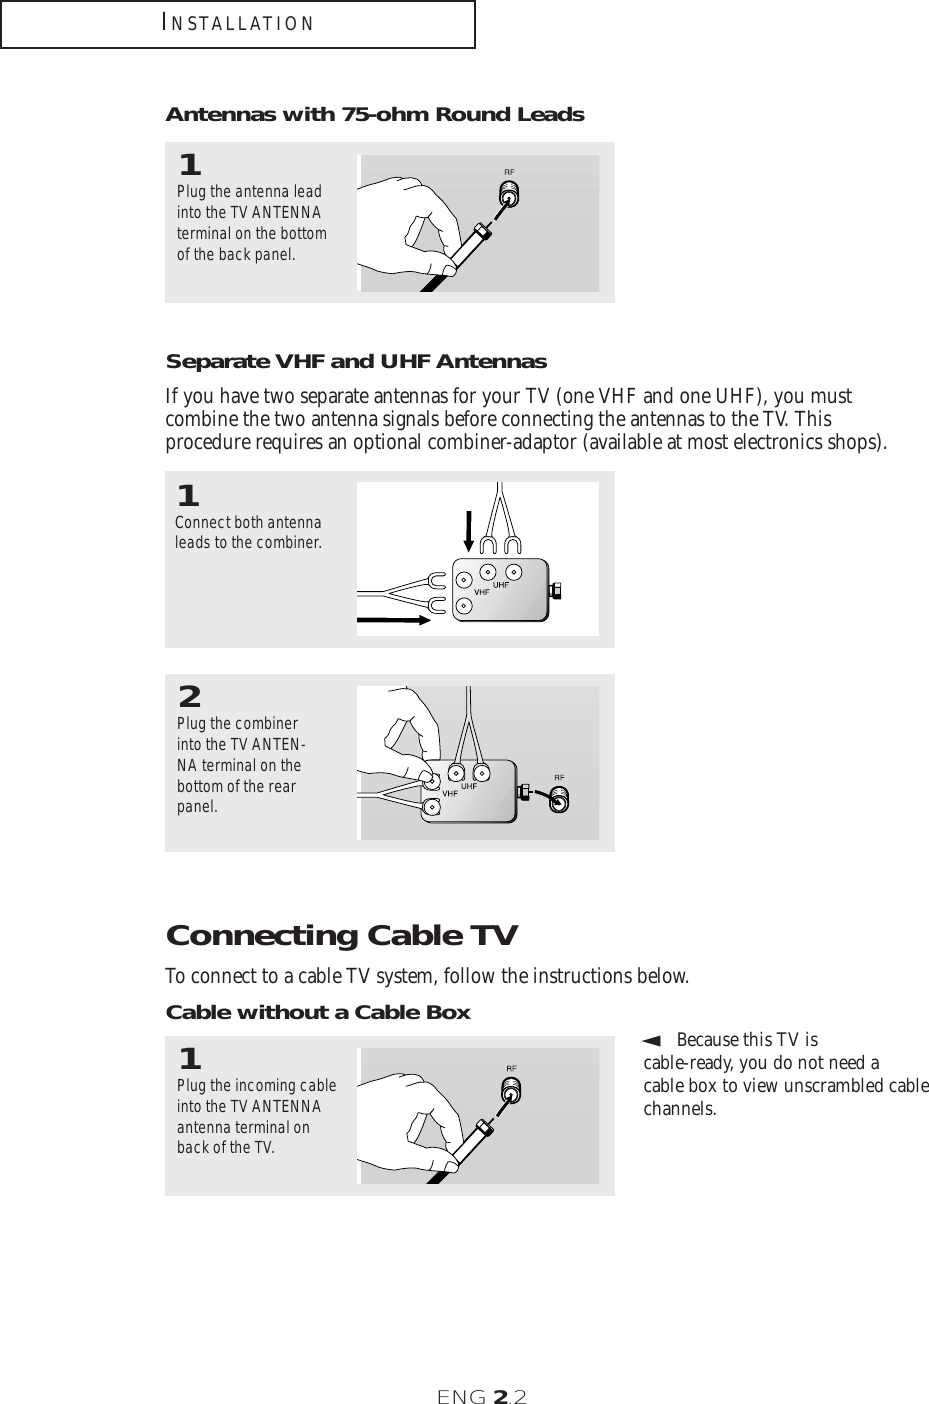 ENG 2.2Connecting Cable TVTo connect to a cable TV system, follow the instructions below.Cable without a Cable Box▼1Plug the incoming cableinto the TV ANTENNA antenna terminal onback of the TV.Because this TV is cable-ready, you do not need a cable box to view unscrambled cablechannels.2Plug the combinerinto the TV ANTEN-NA terminal on thebottom of the rearpanel.INSTALLATIONAntennas with 75-ohm Round Leads1Plug the antenna leadinto the TV ANTENNAterminal on the bottomof the back panel.Separate VHF and UHF AntennasIf you have two separate antennas for your TV (one VHF and one UHF), you must combine the two antenna signals before connecting the antennas to the TV. This procedure requires an optional combiner-adaptor (available at most electronics shops).1Connect both antennaleads to the combiner.